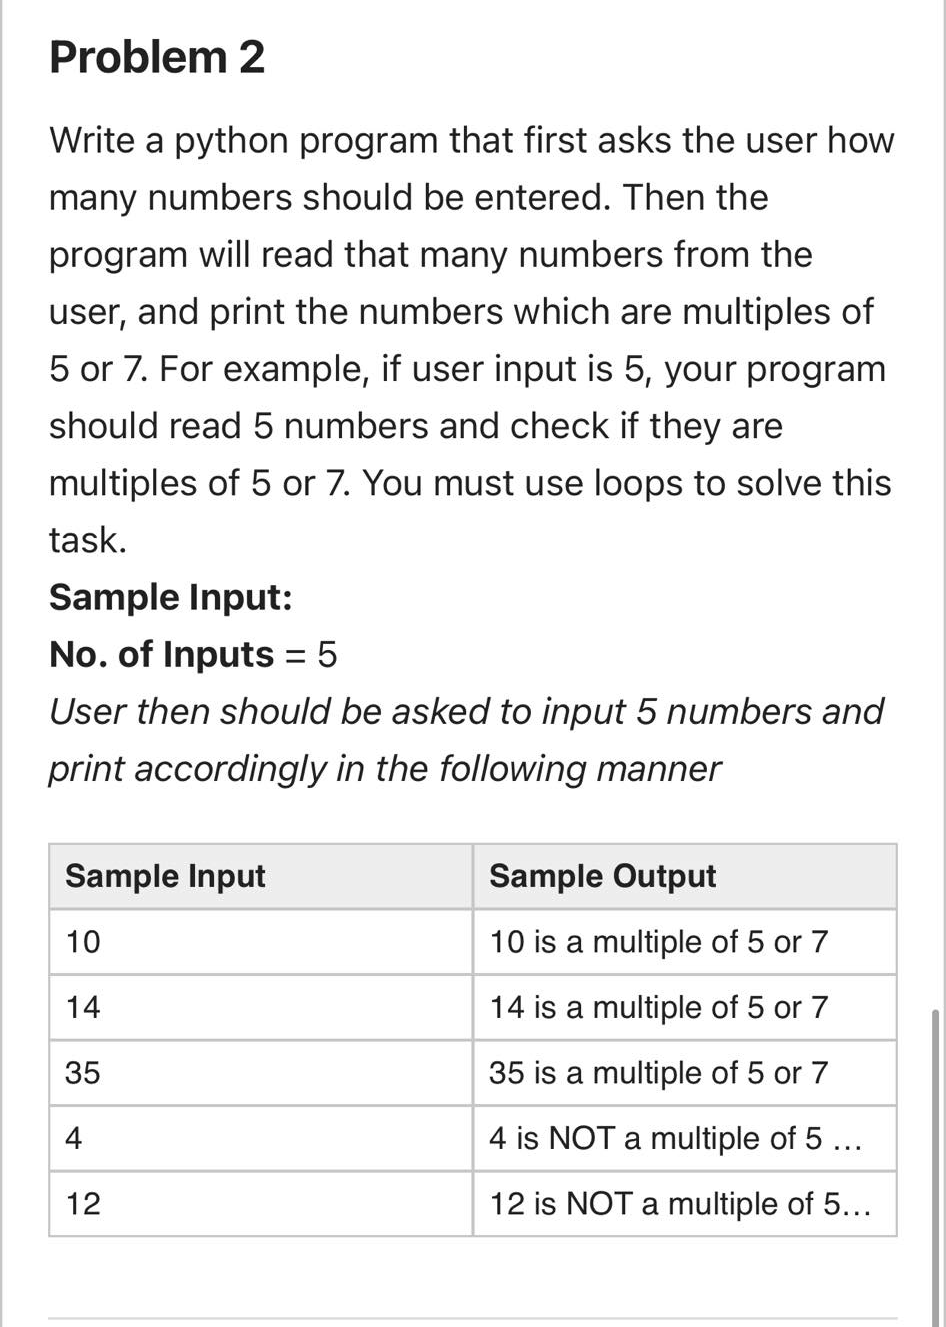 Problem 2
Write a python program that first asks the user how
many numbers should be entered. Then the
program will read that many numbers from the
user, and print the numbers which are multiples of
5 or 7. For example, if user input is 5, your program
should read 5 numbers and check if they are
multiples of 5 or 7. You must use loops to solve this
task.
Sample Input:
No. of Inputs = 5
%3D
User then should be asked to input 5 numbers and
print accordingly in the following manner
Sample Input
Sample Output
10
10 is a multiple of 5 or 7
14
14 is a multiple of 5 or 7
35
35 is a multiple of 5 or 7
4
4 is NOT a multiple of 5...
12
12 is NOT a multiple of 5...
